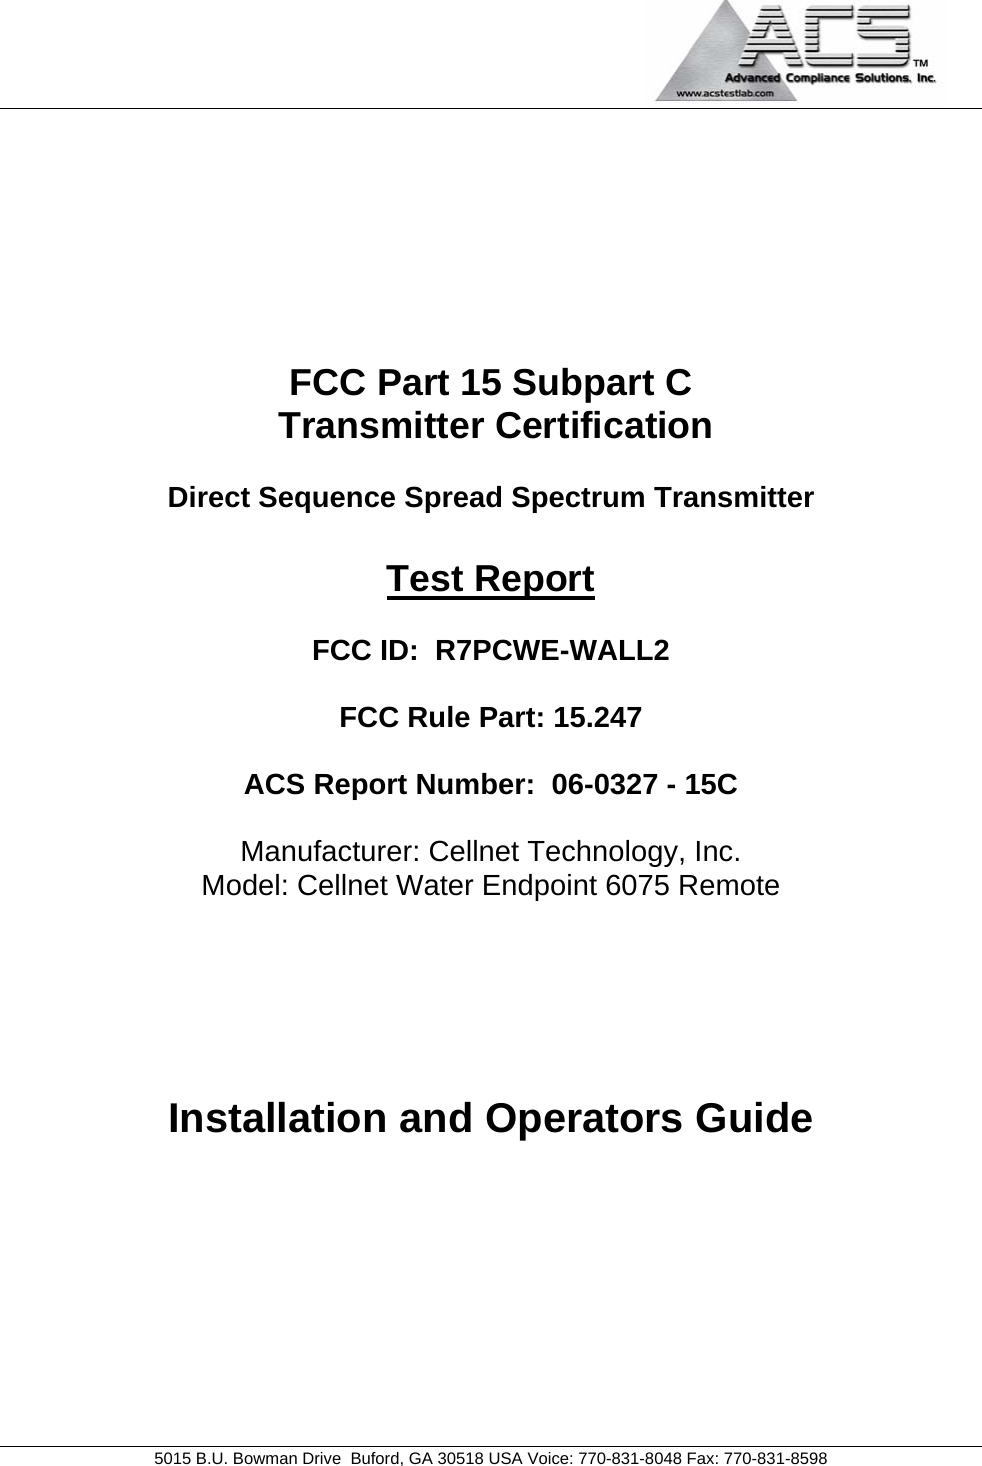                                             5015 B.U. Bowman Drive  Buford, GA 30518 USA Voice: 770-831-8048 Fax: 770-831-8598   FCC Part 15 Subpart C  Transmitter Certification  Direct Sequence Spread Spectrum Transmitter  Test Report  FCC ID:  R7PCWE-WALL2  FCC Rule Part: 15.247  ACS Report Number:  06-0327 - 15C   Manufacturer: Cellnet Technology, Inc. Model: Cellnet Water Endpoint 6075 Remote     Installation and Operators Guide  